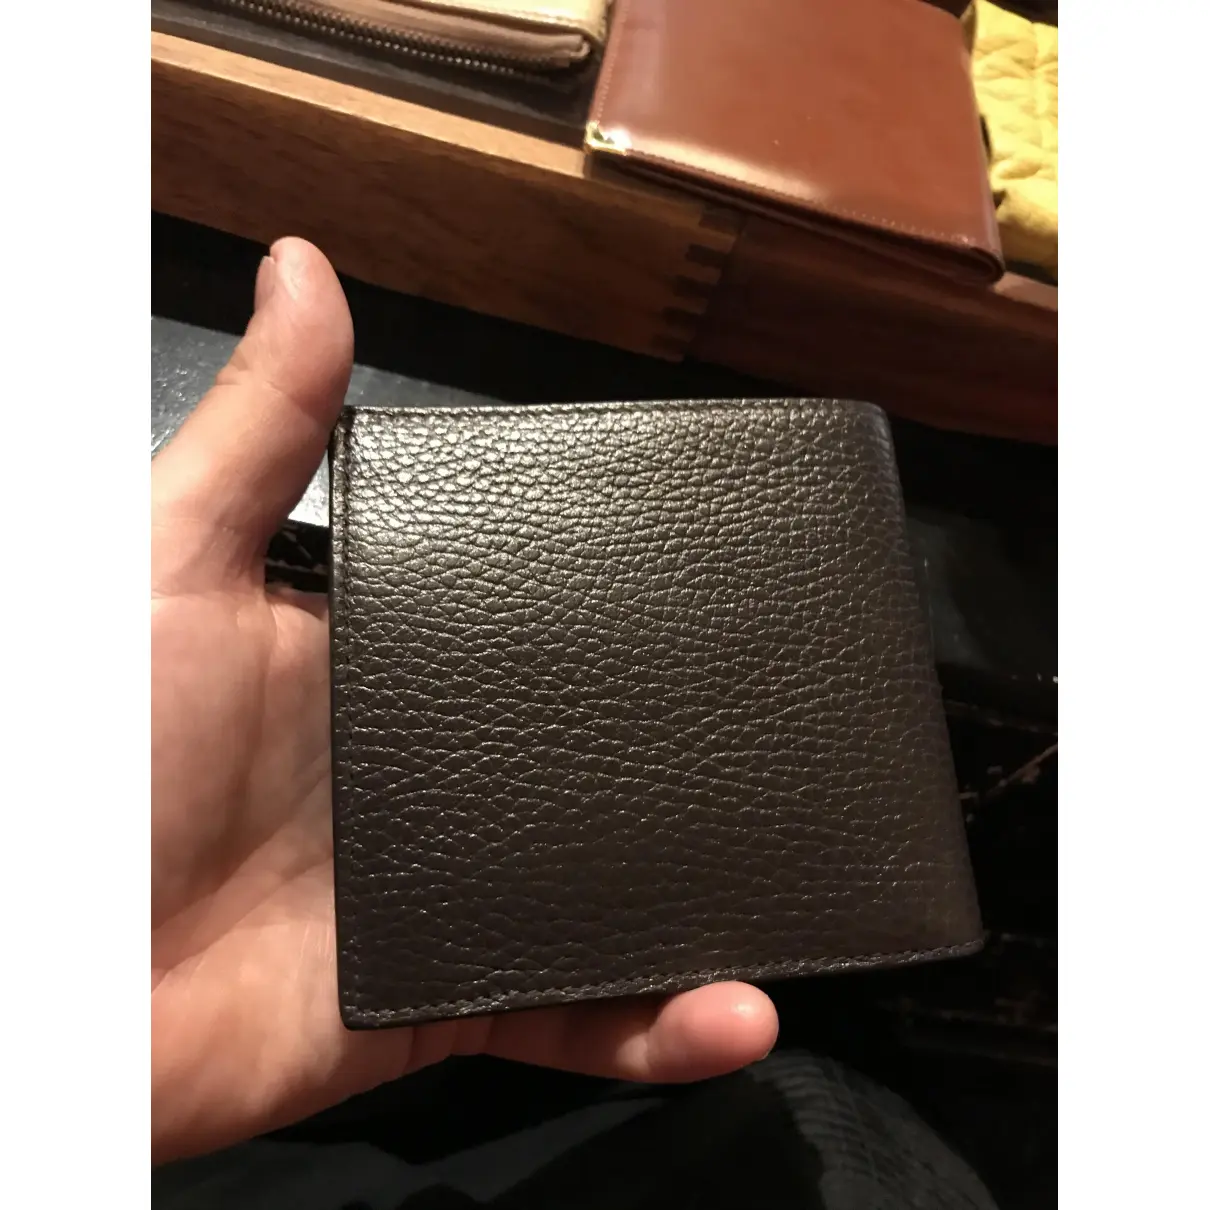 Leather small bag Gucci